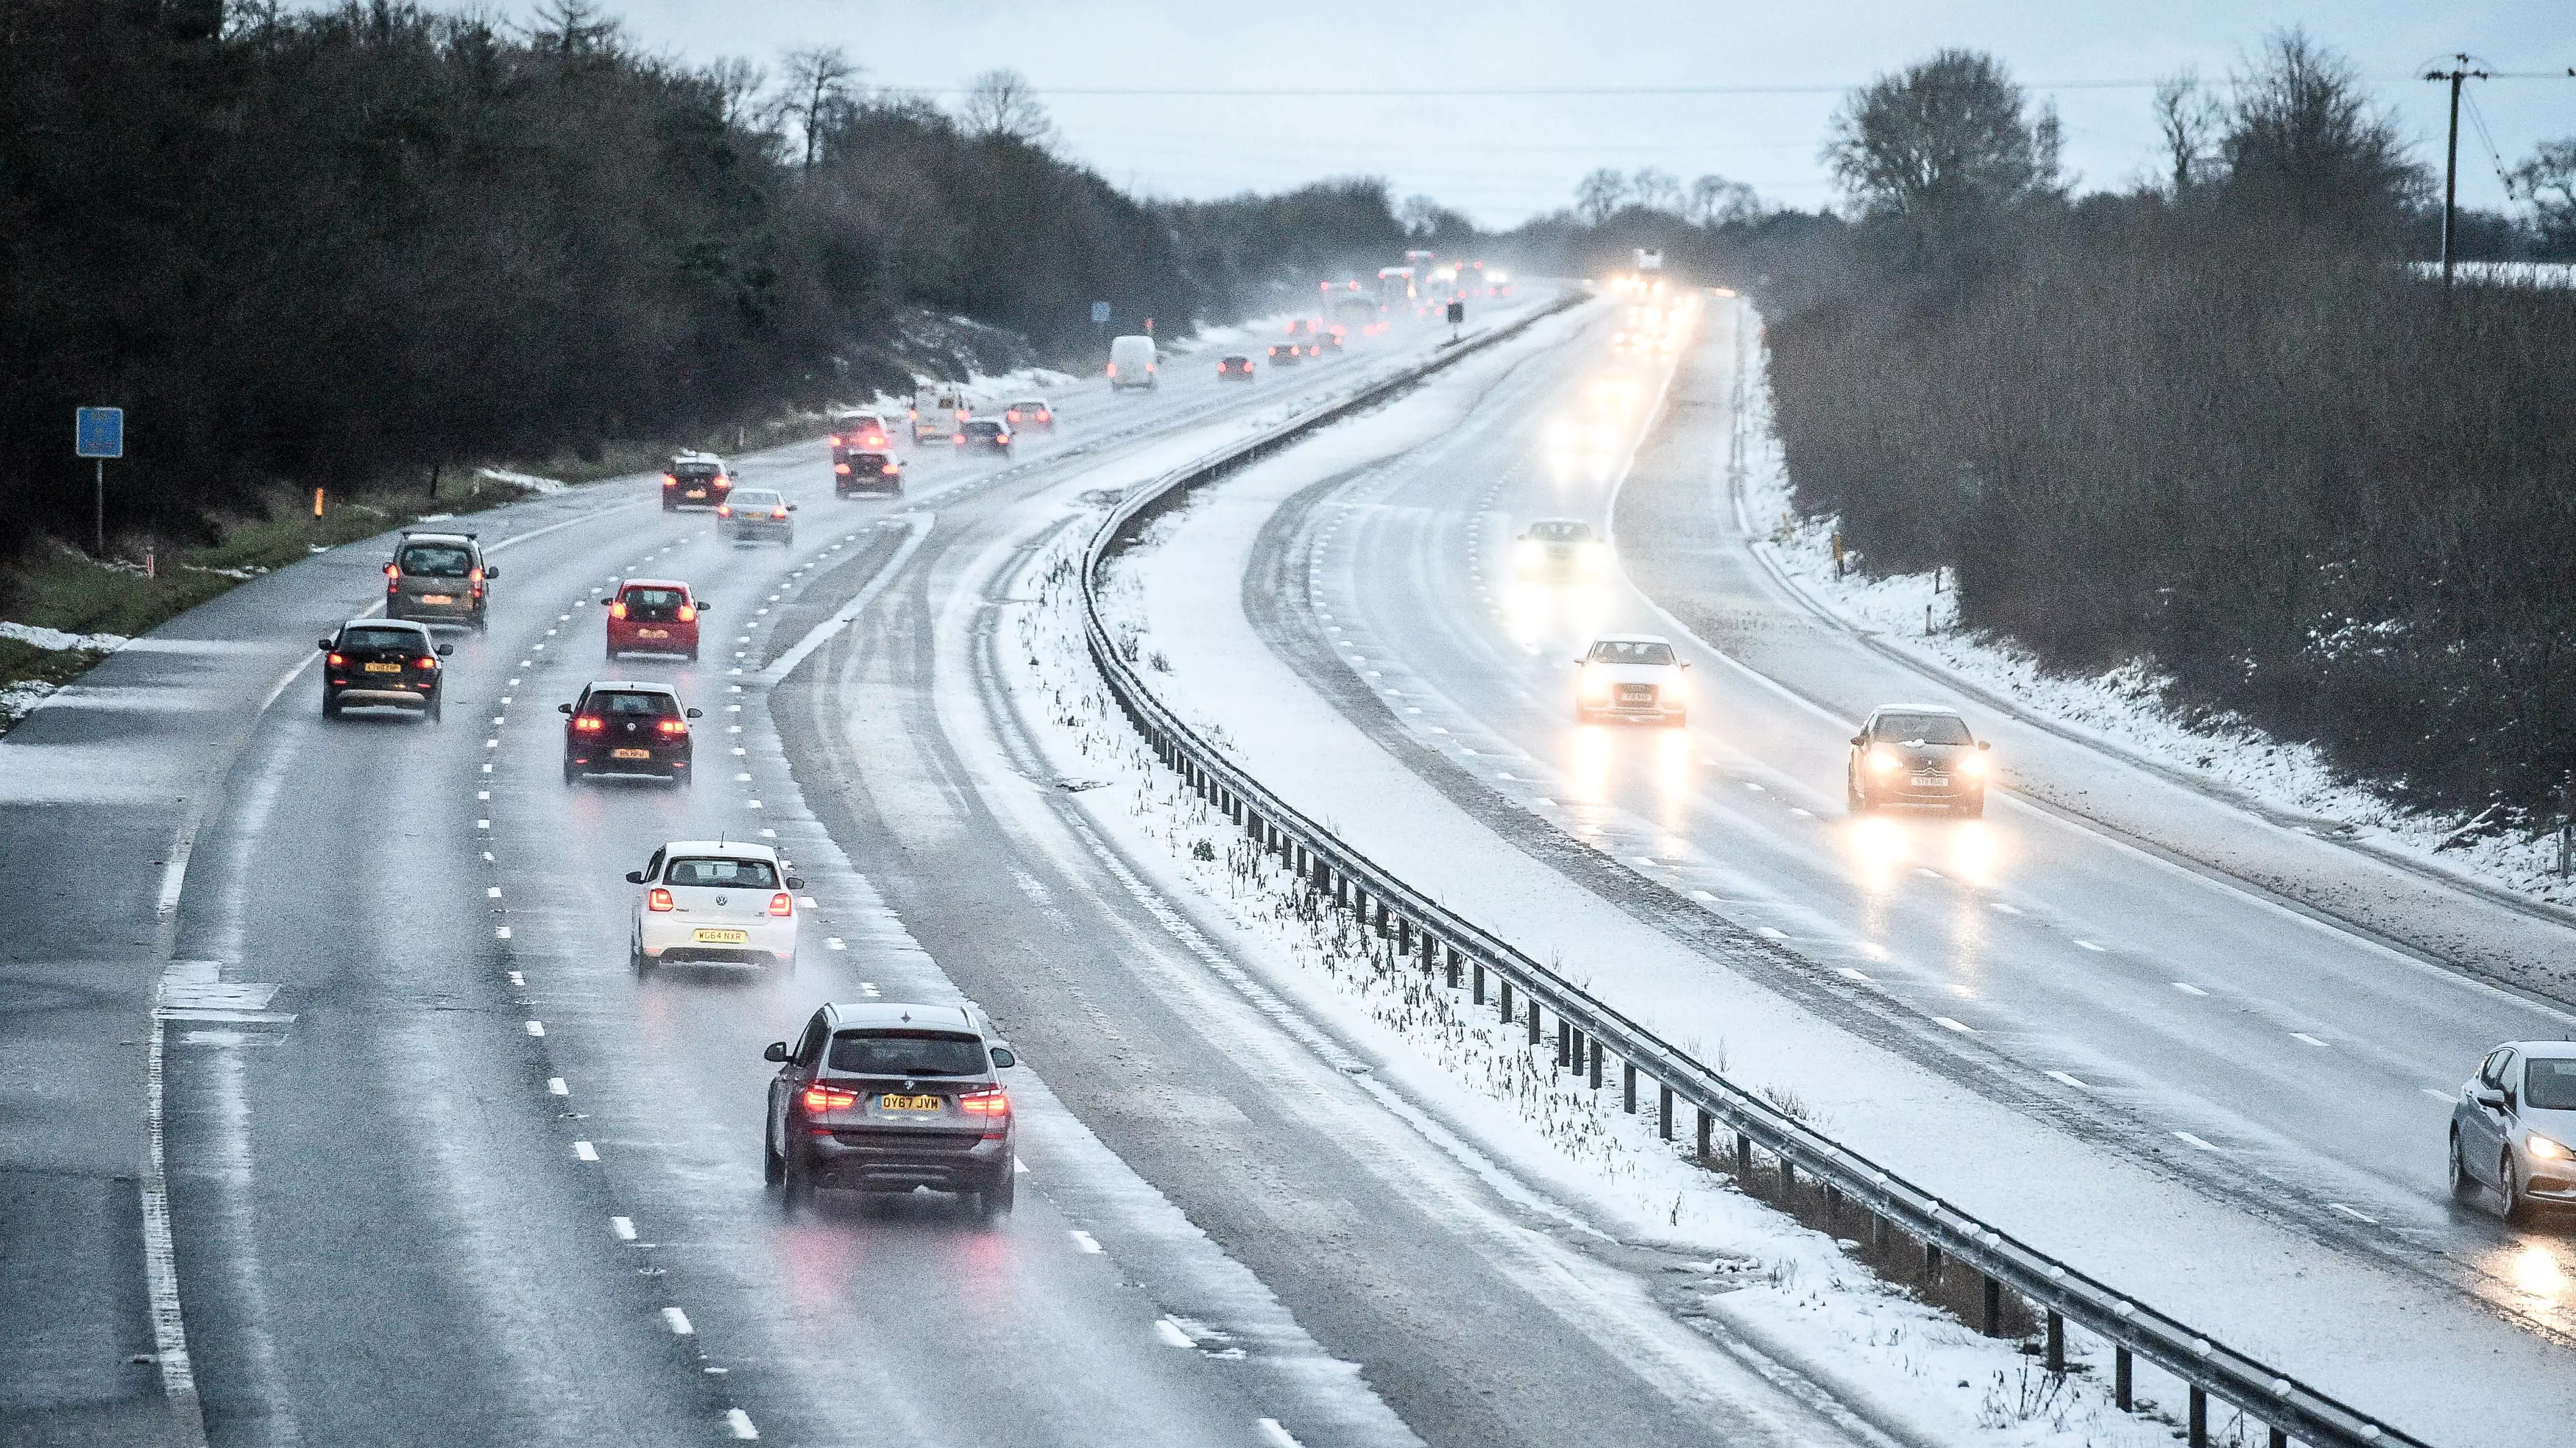 Met Office Predicts Heavy Snow Across The UK With Yellow Weather Warning